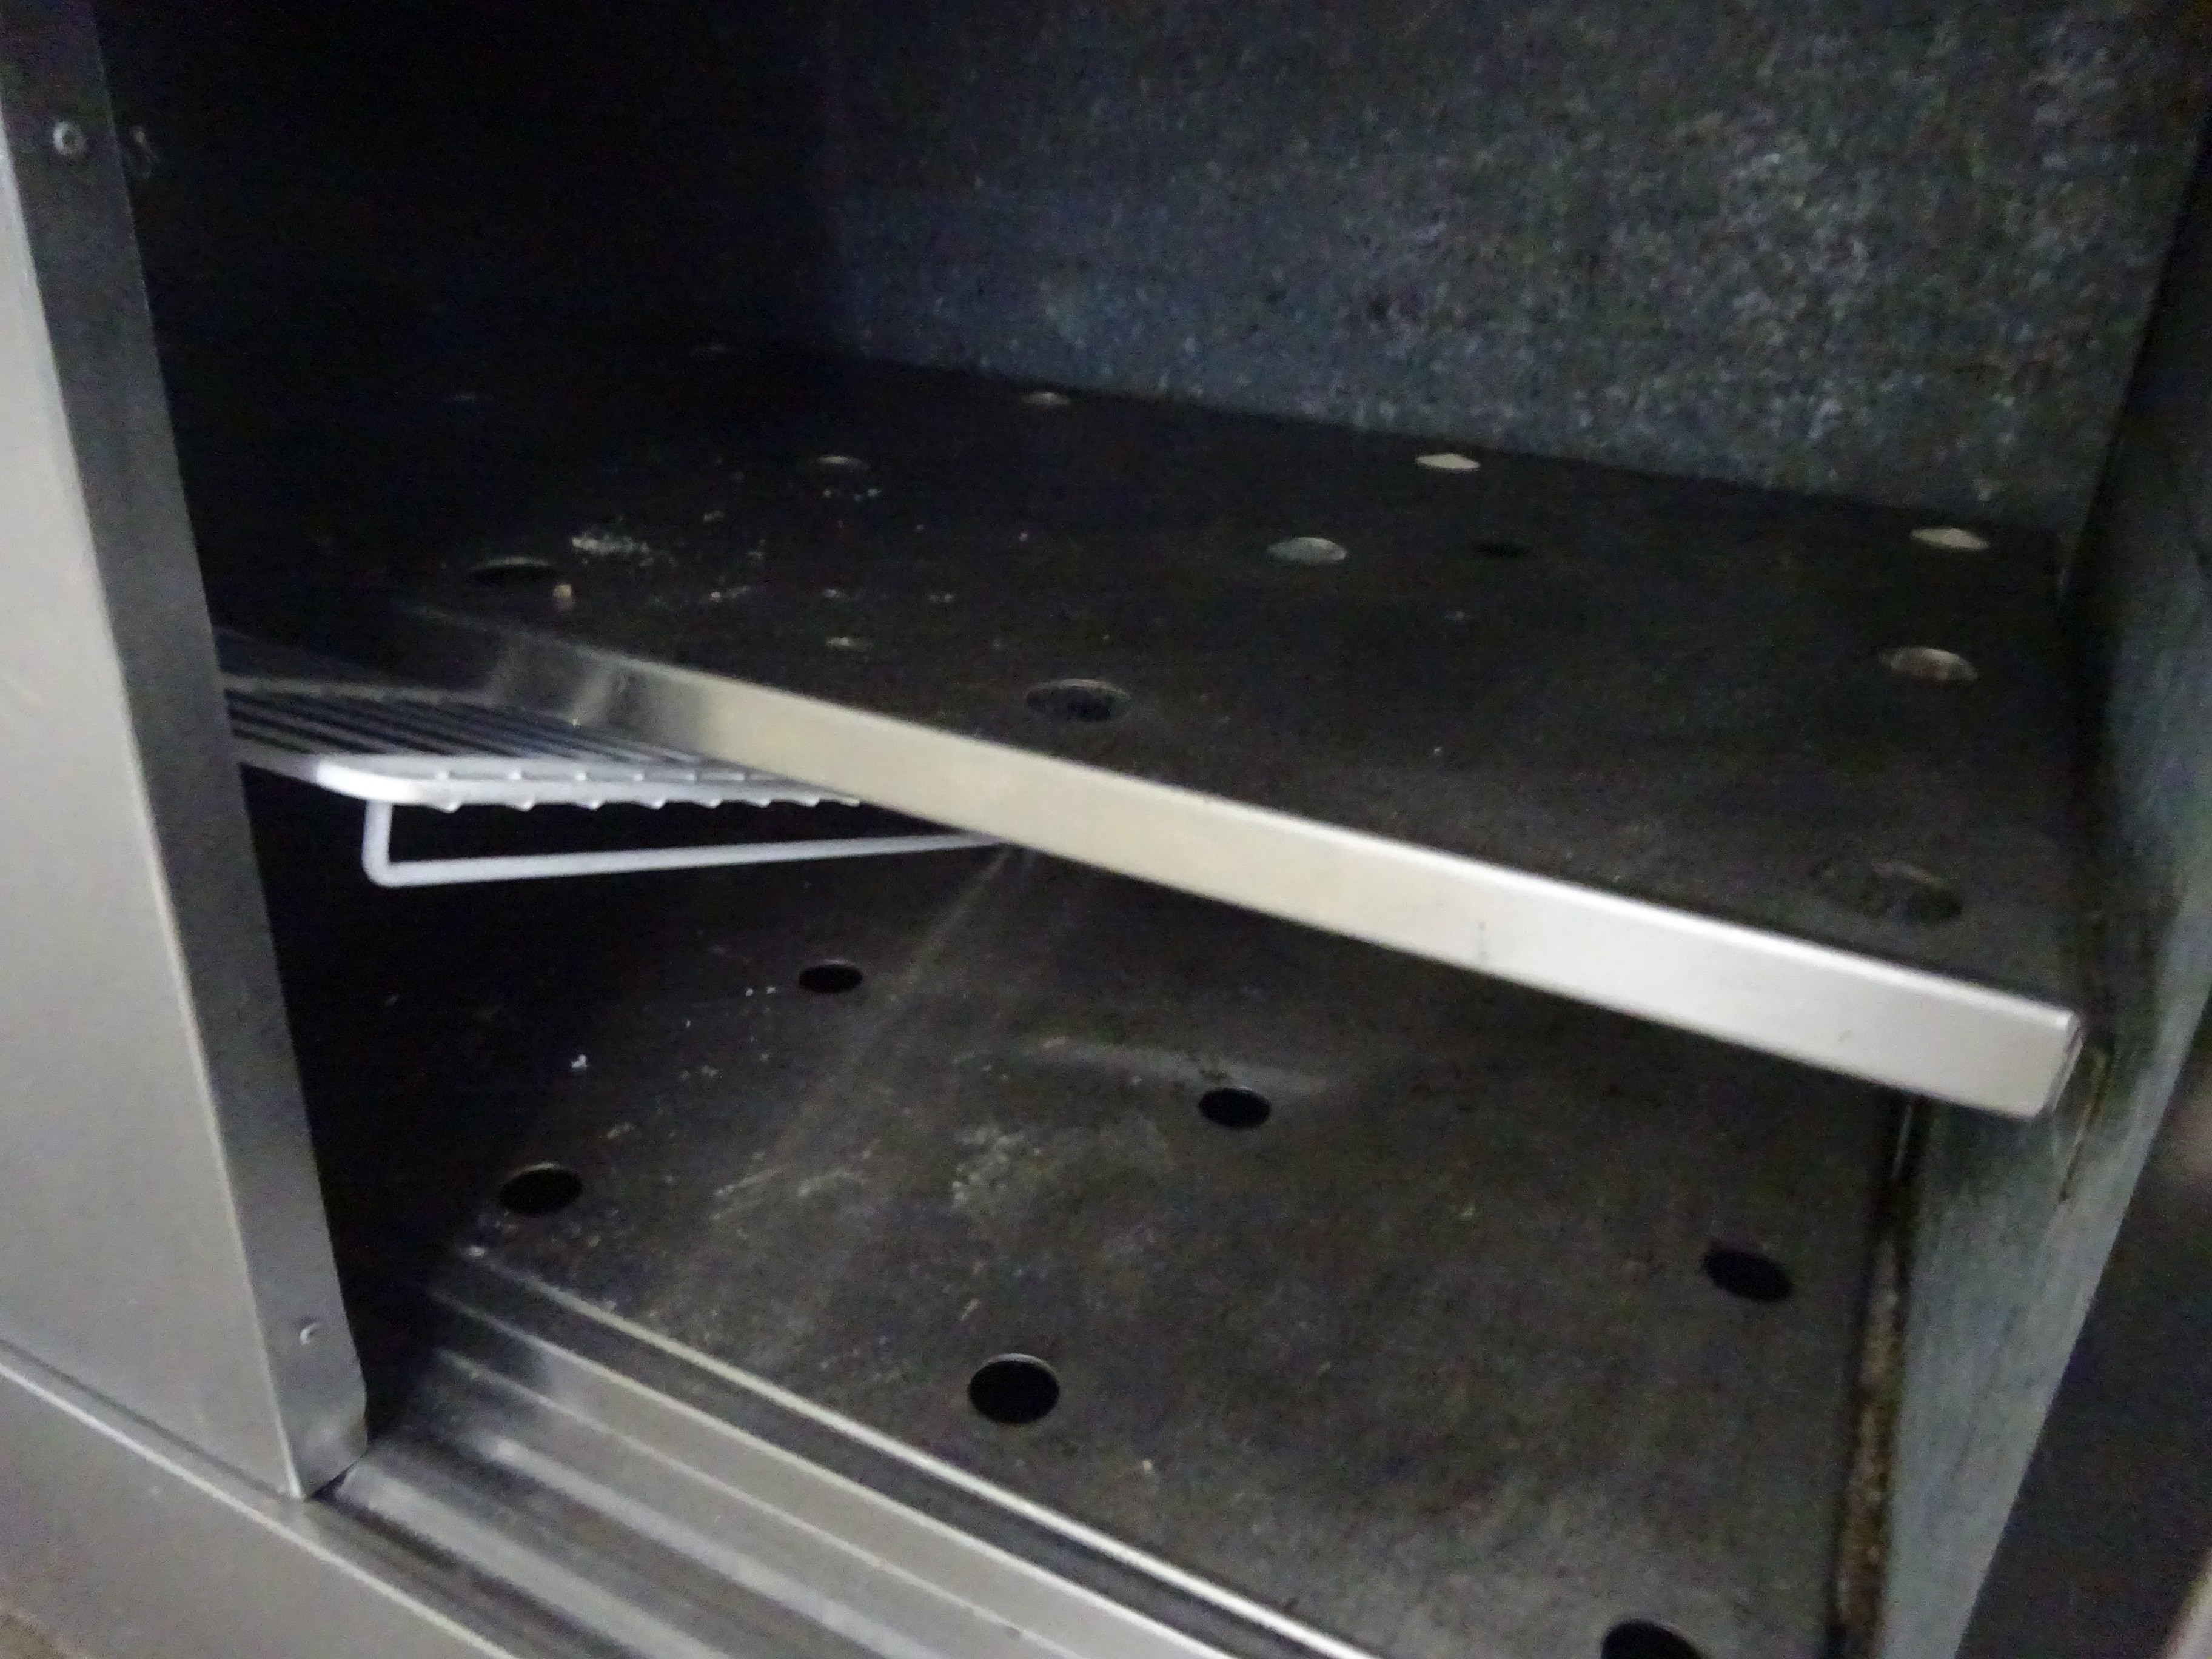 Mobile stainless steel hot cupboard, 240v, 130cms. - Image 3 of 3